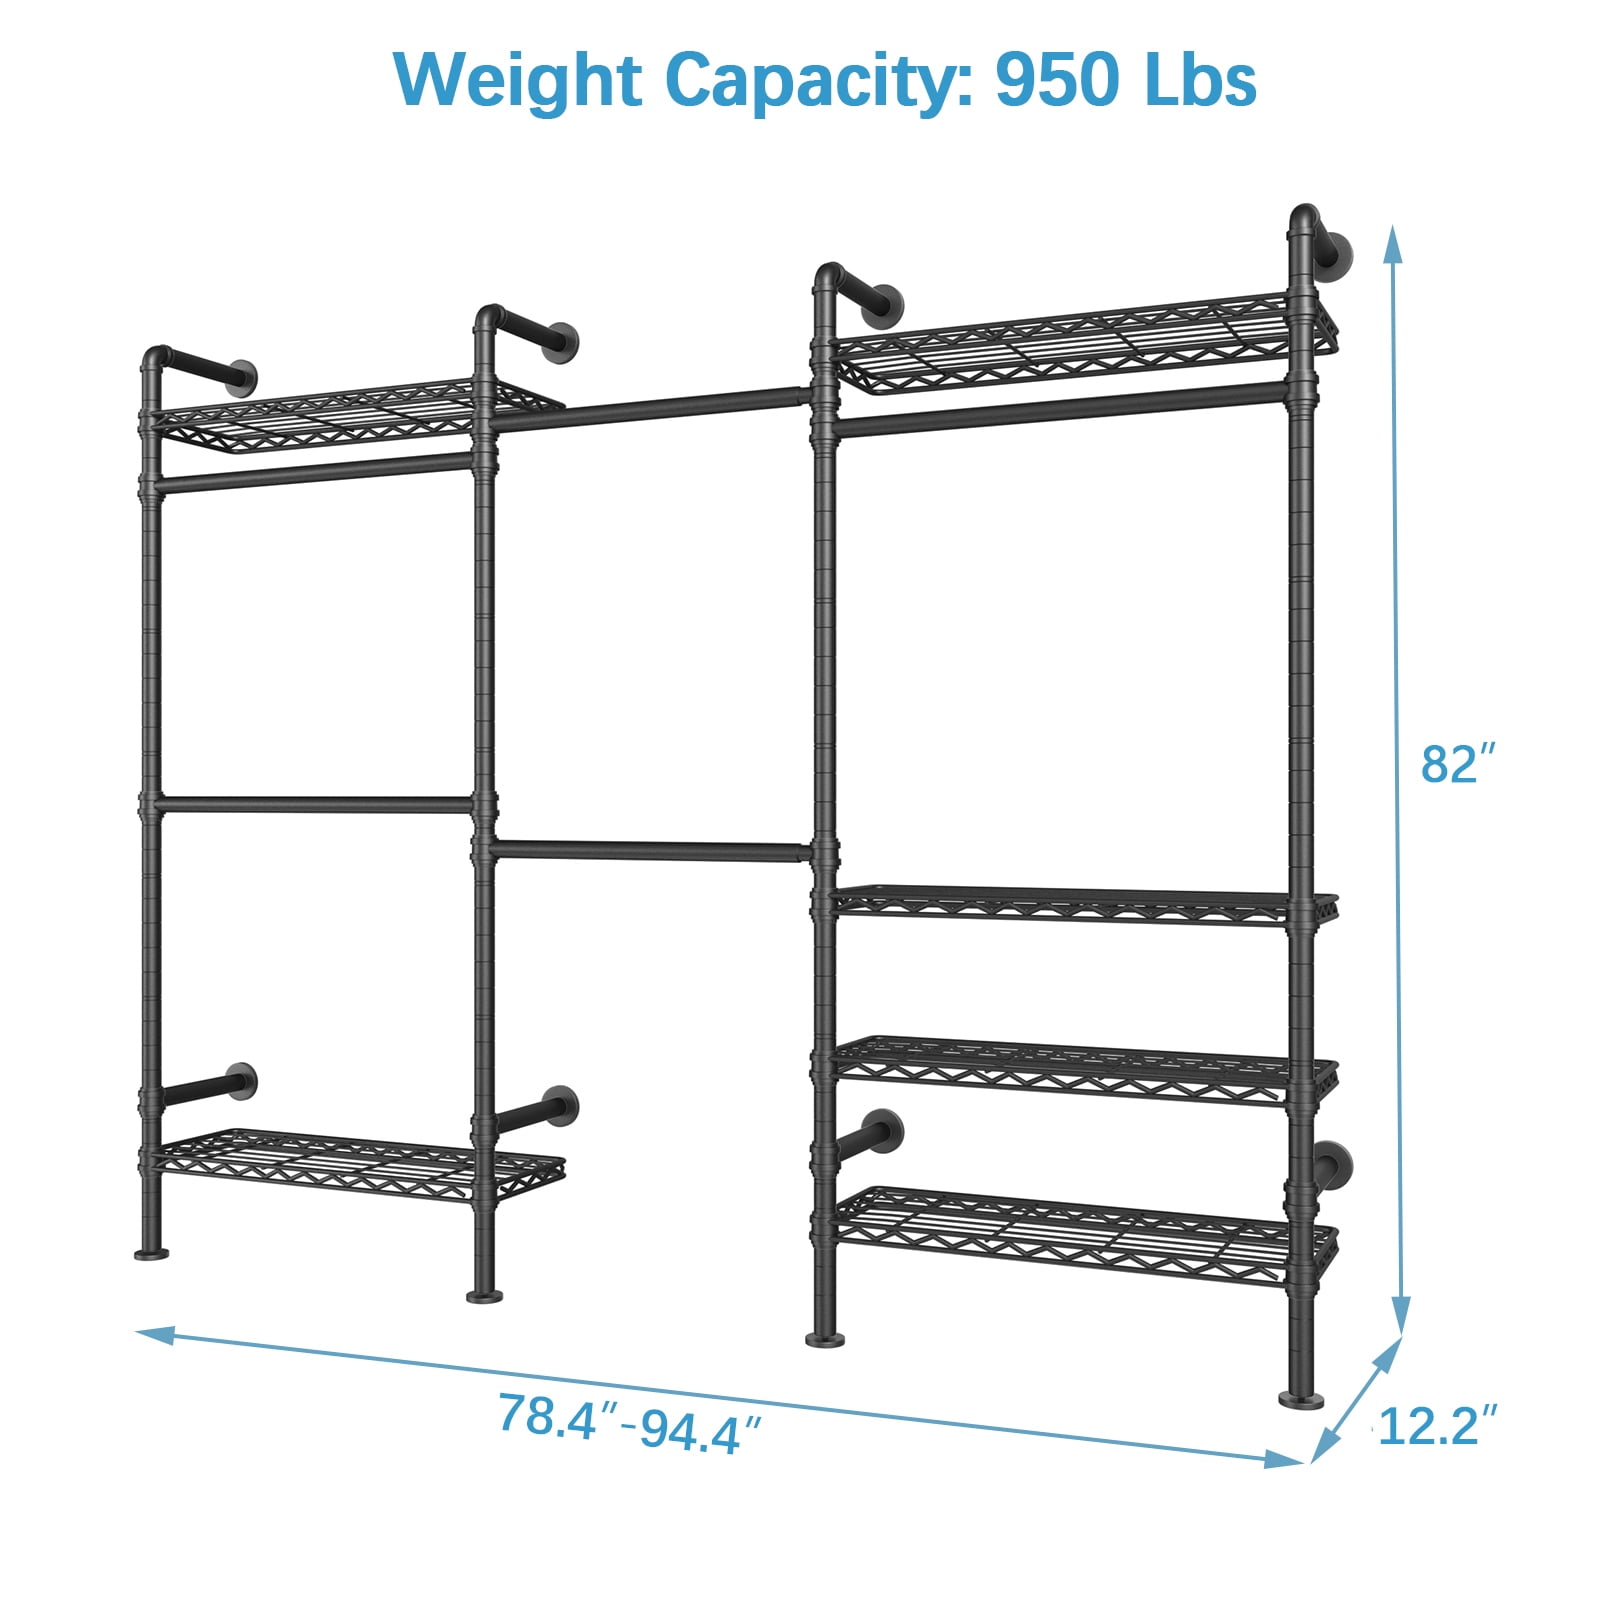 Timate P6 Medium Clothes Rack Closet Organizer System Set Wall Mounted Fits  Space 5.3-8.3 ft, Black